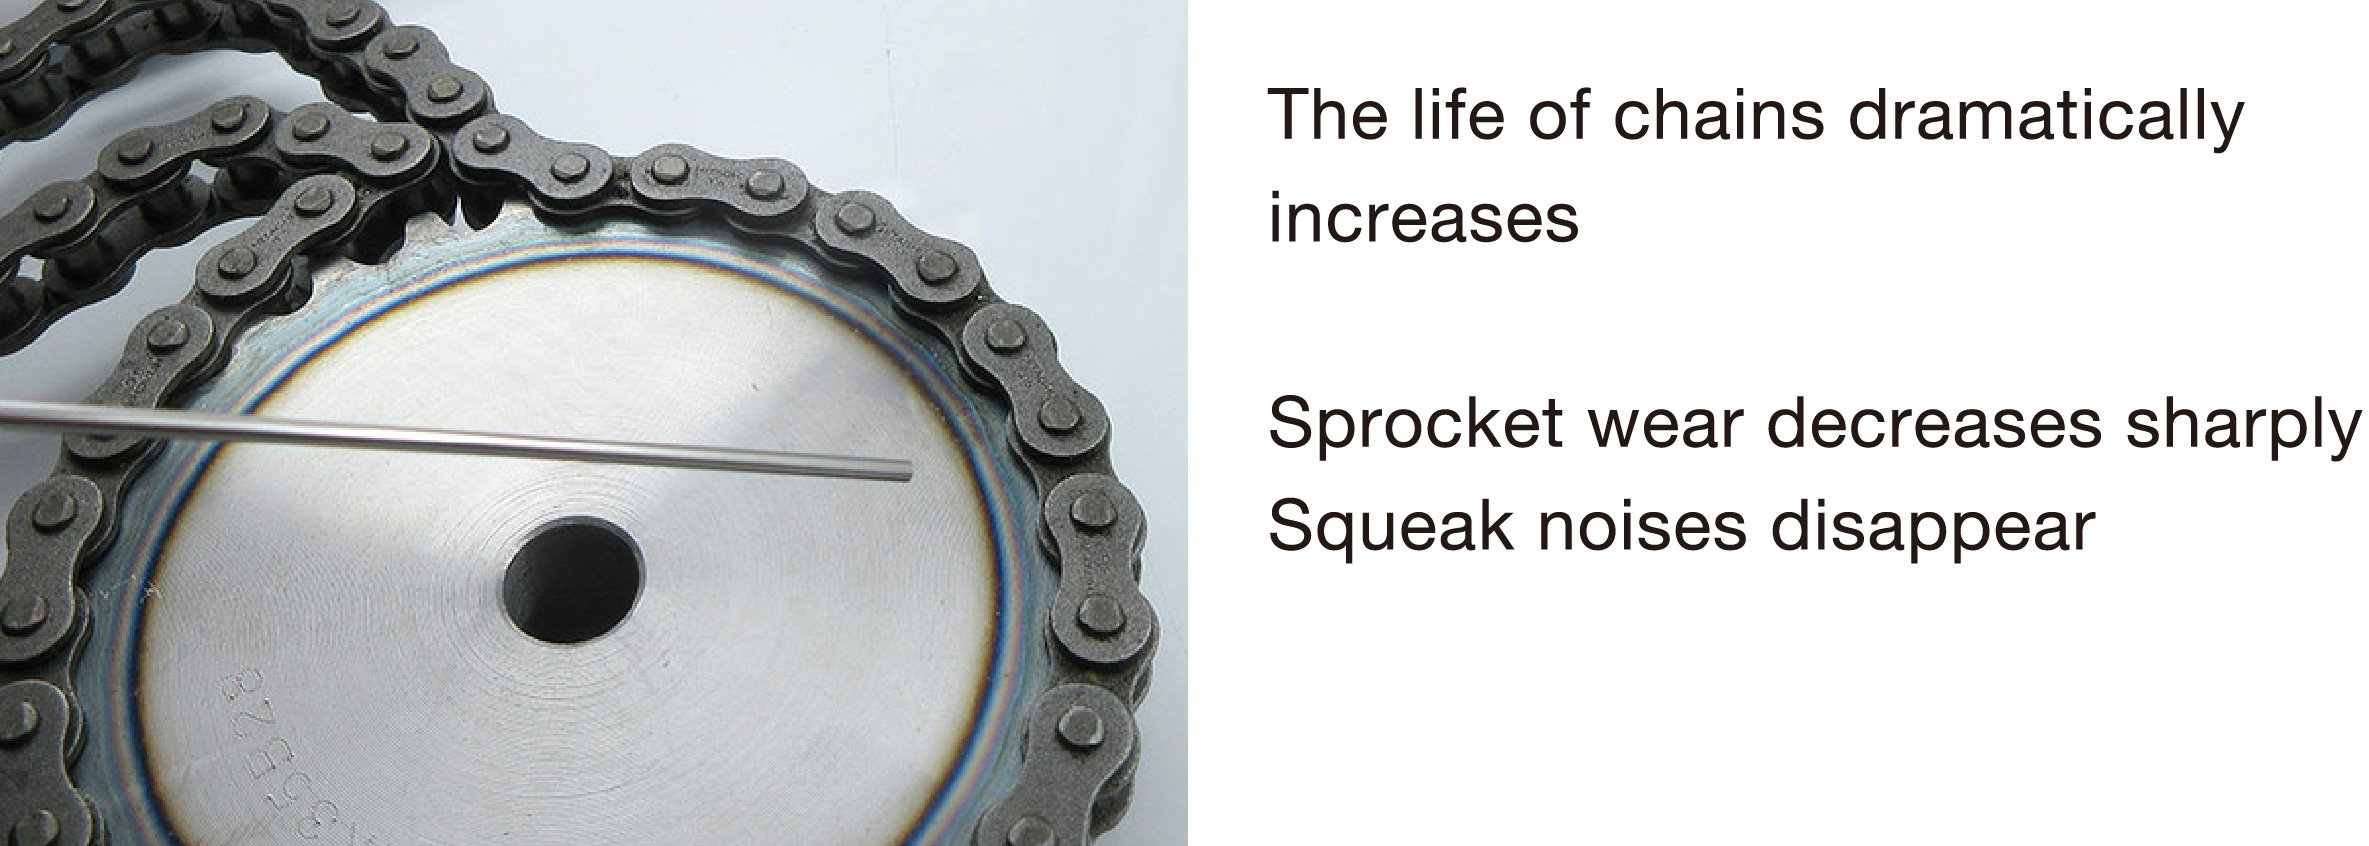 The life of chains dramatically increases. Sprocket wear decreases sharply Squeak noises disappear.